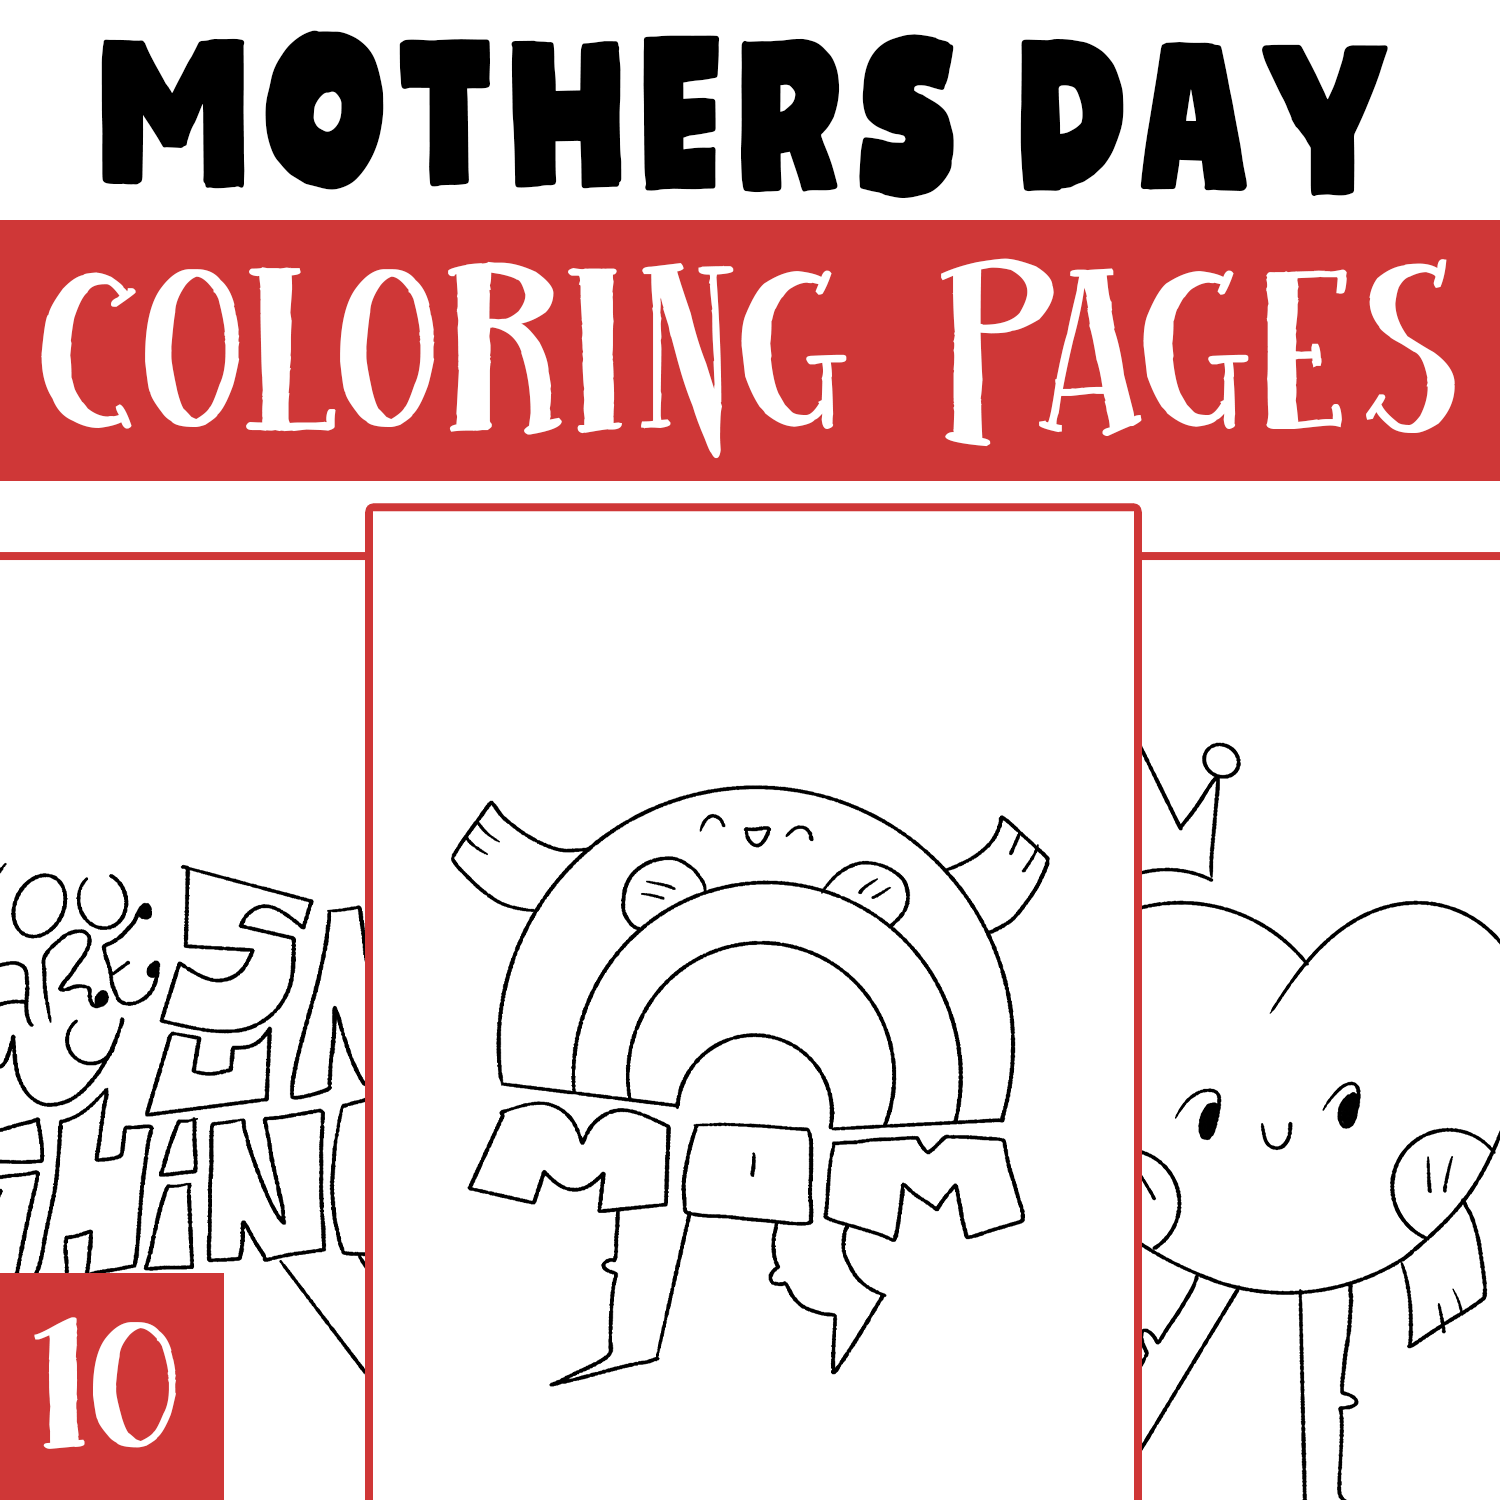 Mothers day coloring pages mothers day coloring sheet activity morning work made by teachers